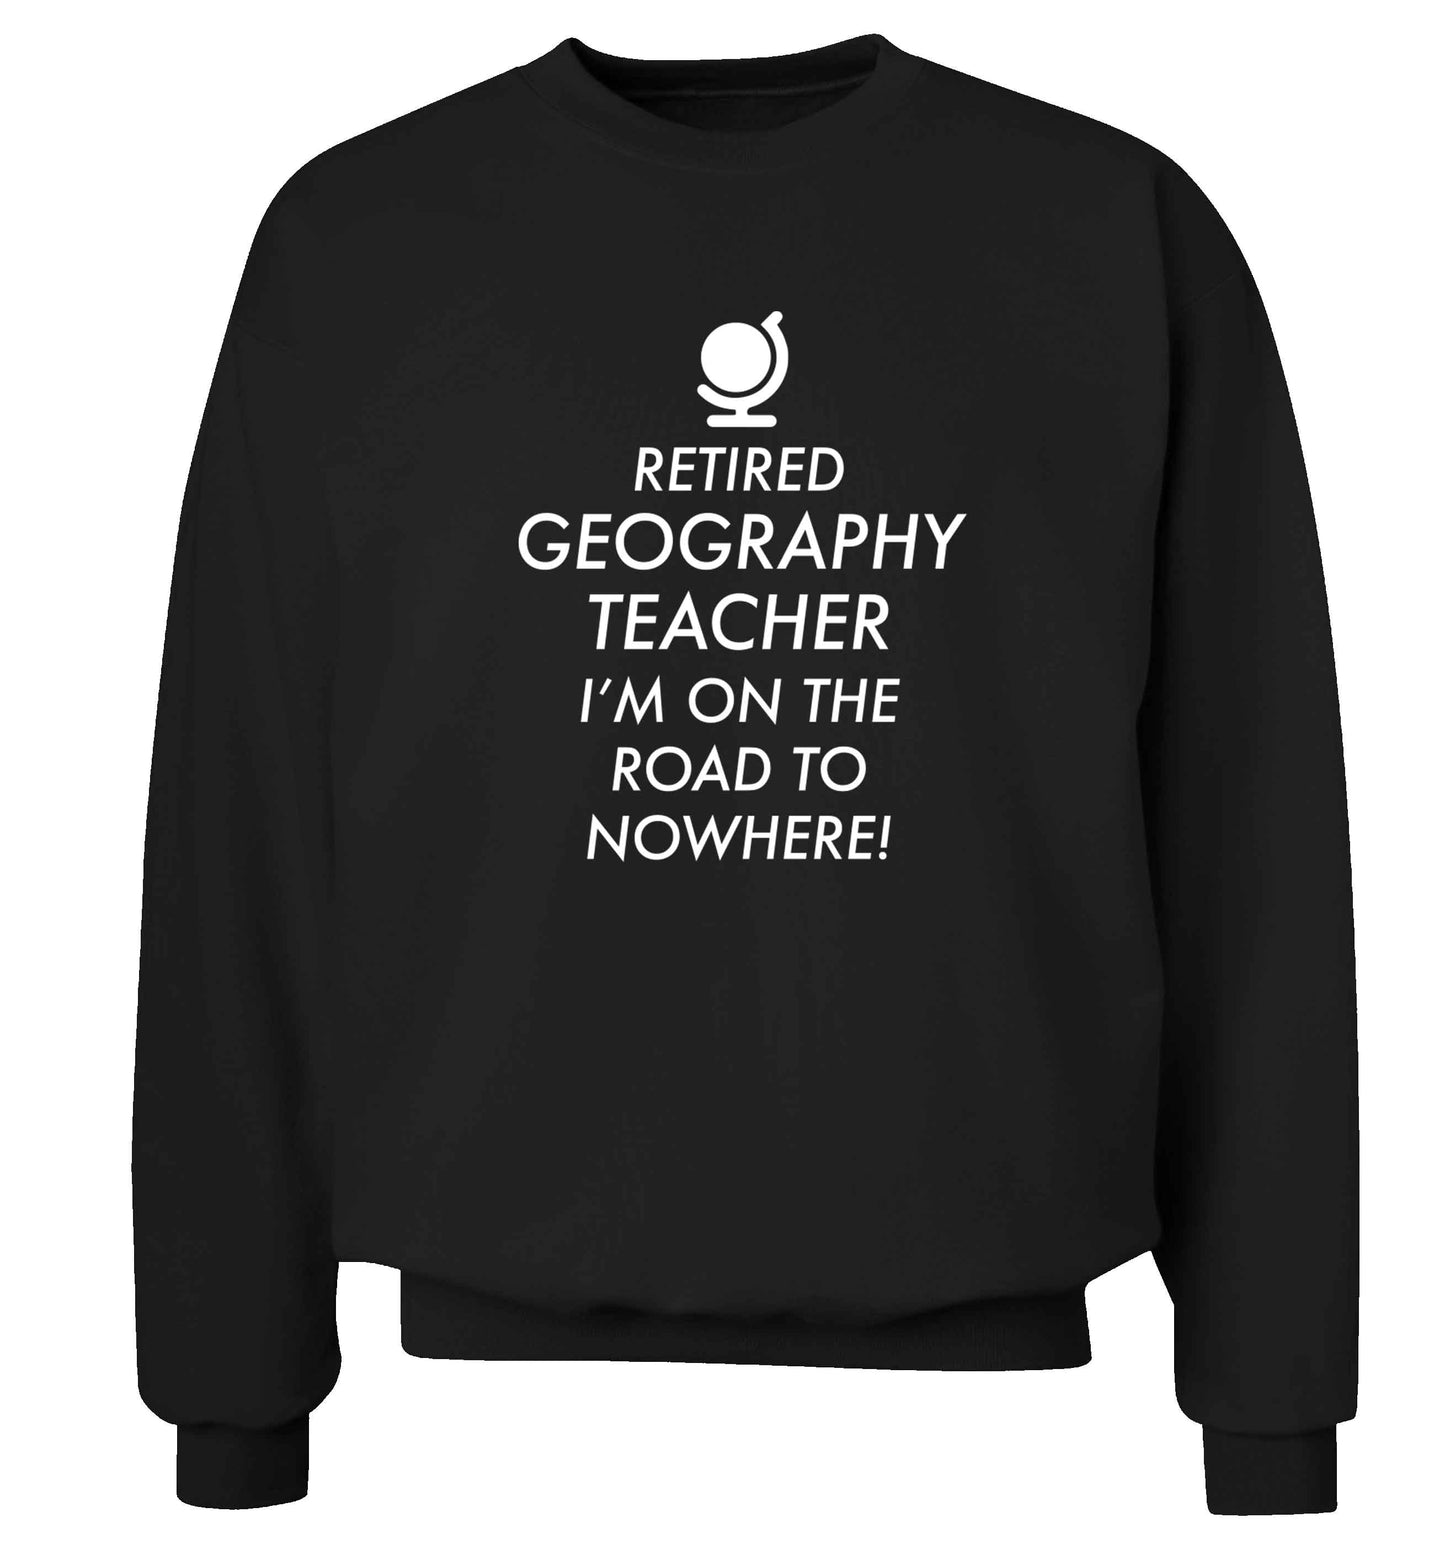 Retired geography teacher I'm on the road to nowhere Adult's unisex black Sweater 2XL